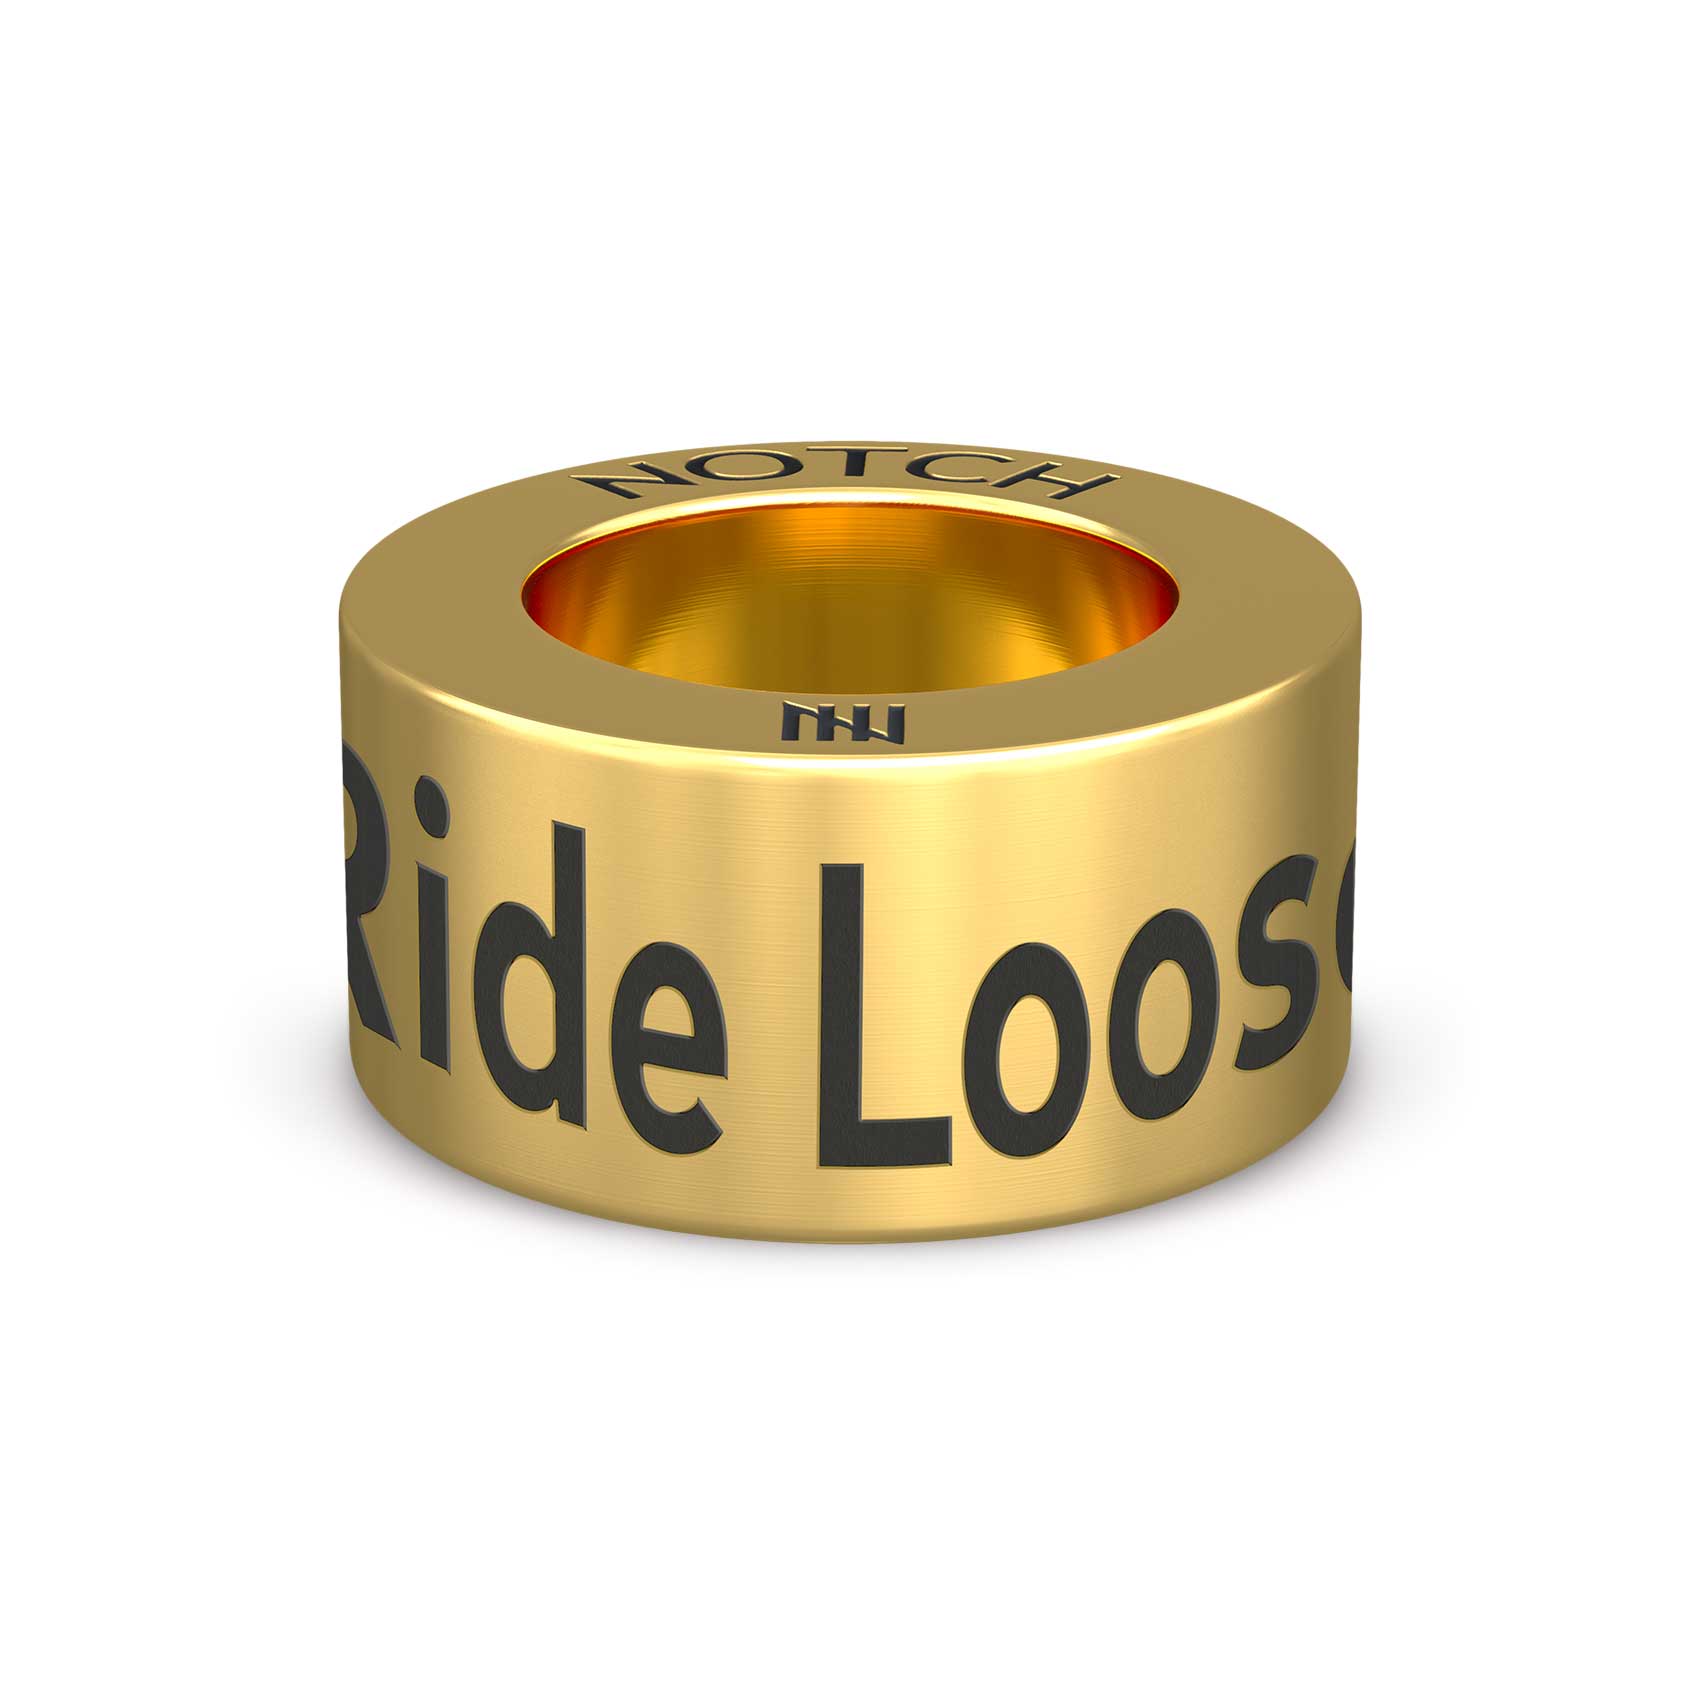 Ride Loose by Cobbs